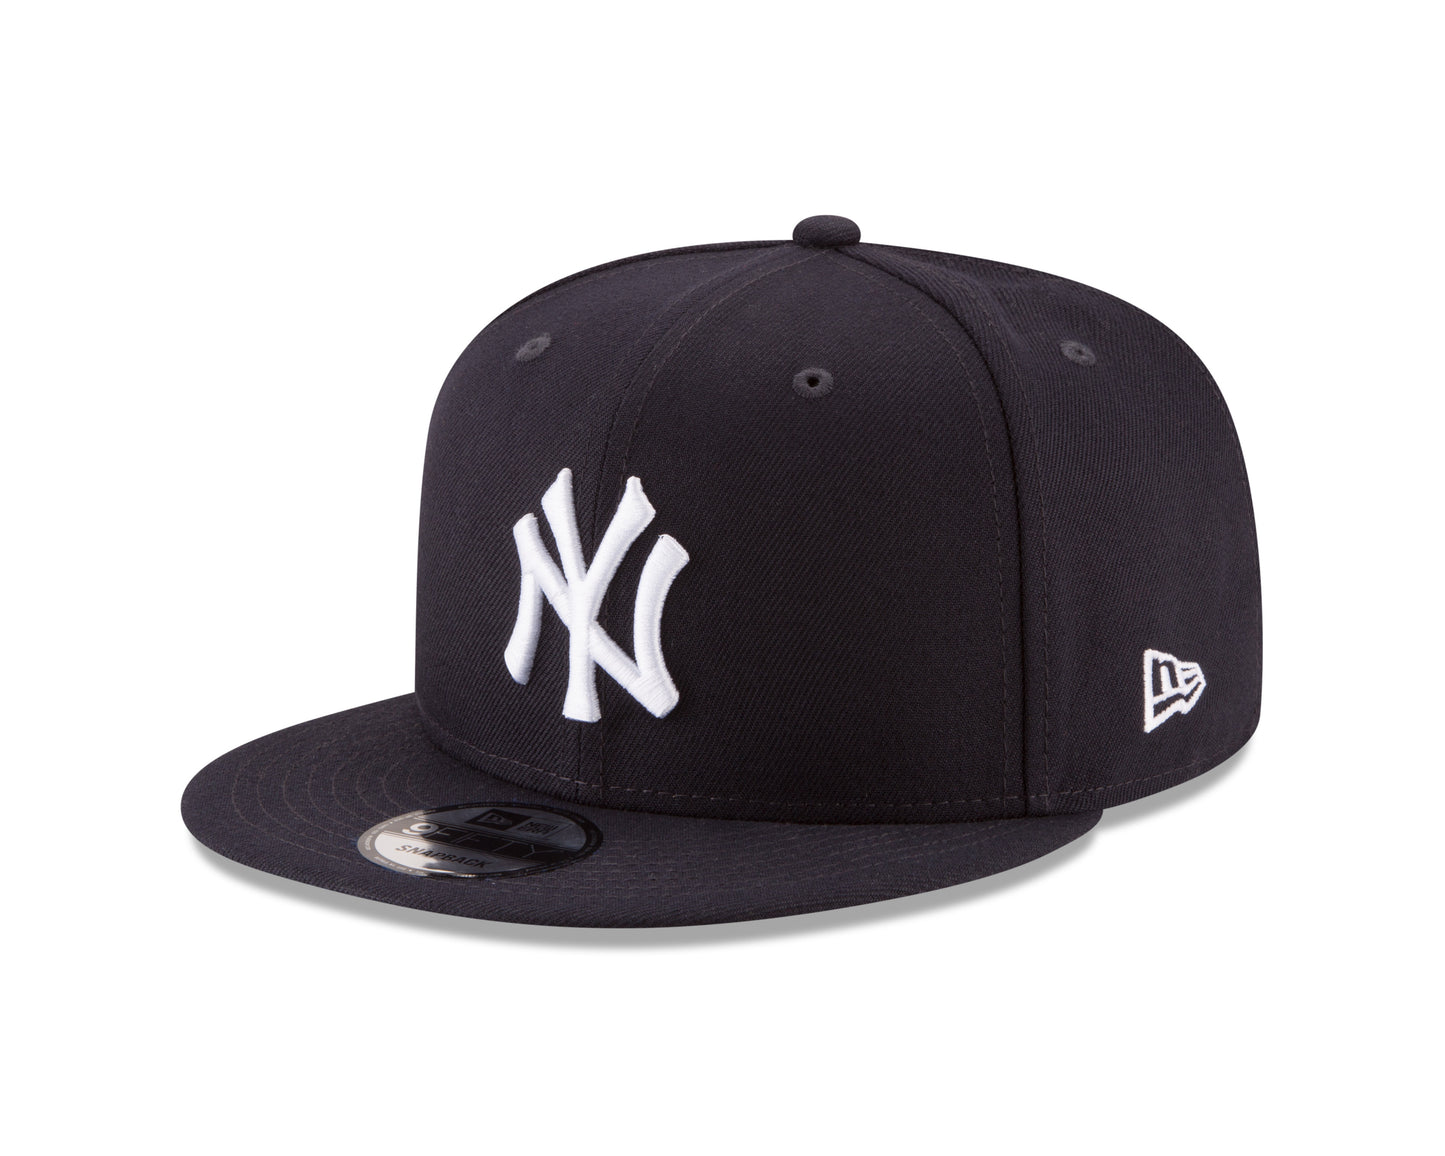 New York Yankees New Era Navy 9/11 Memorial Side Patch 59FIFTY Fitted Hat